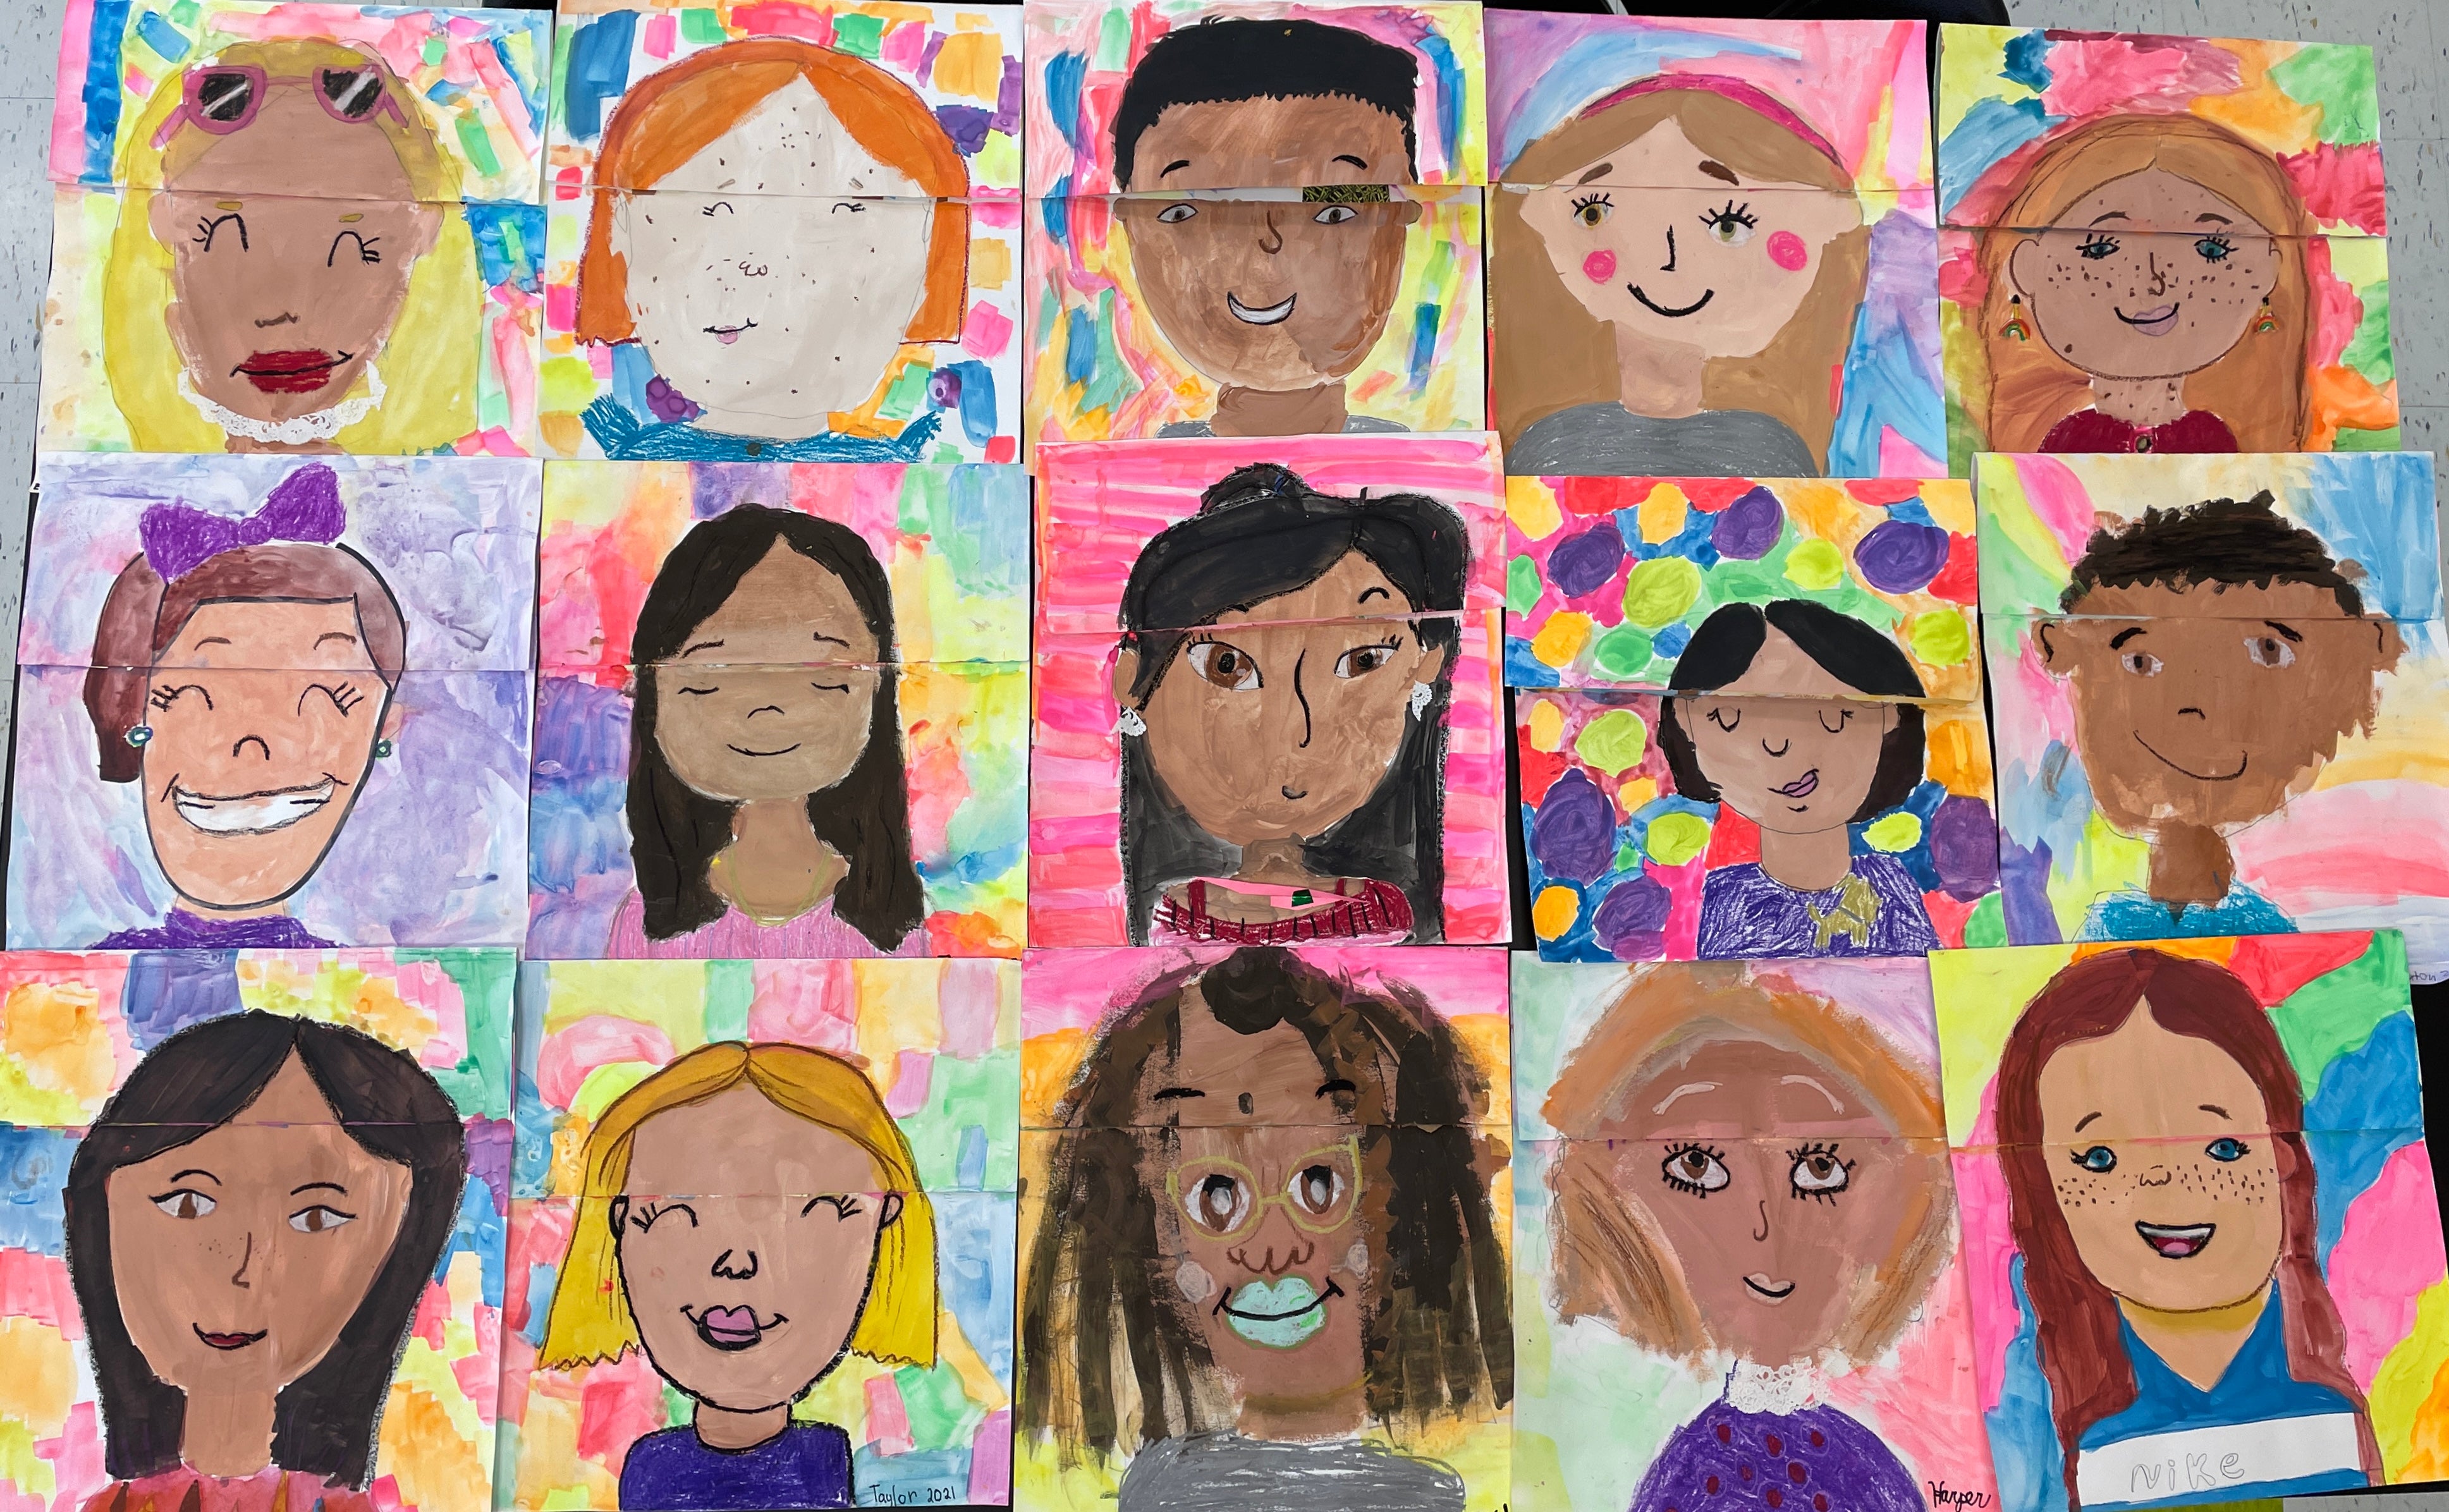 50 Inspiring Fourth Grade Art Projects for Creative Kids